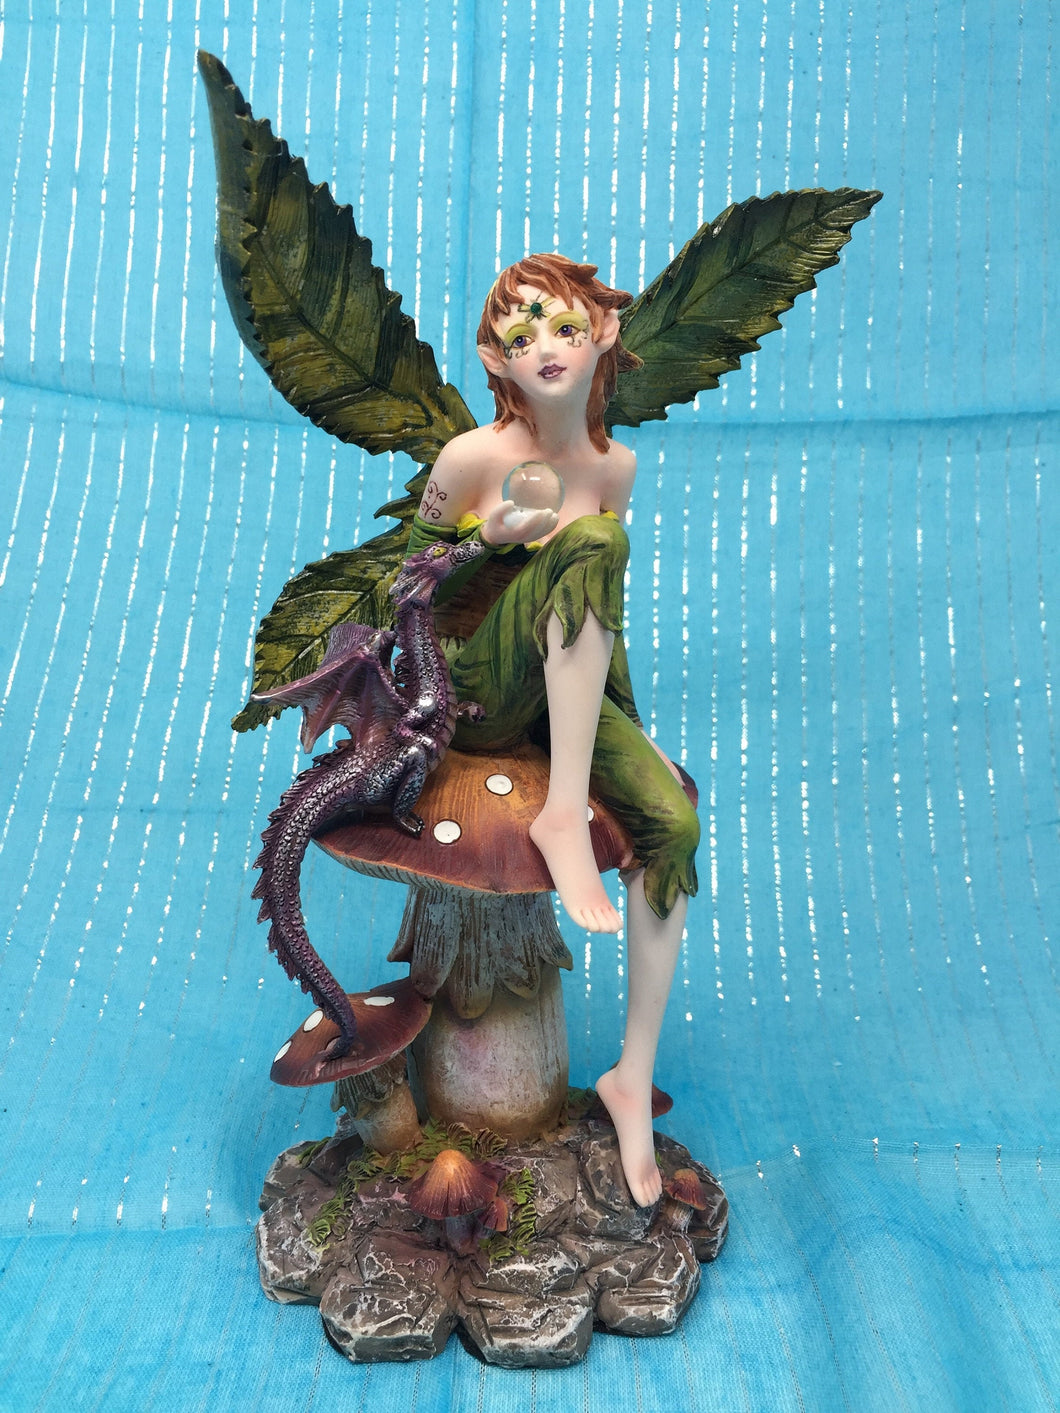 Fairy Sitting on Toadstool With Dragon And Crystal Ball Figurine Statue Ornament